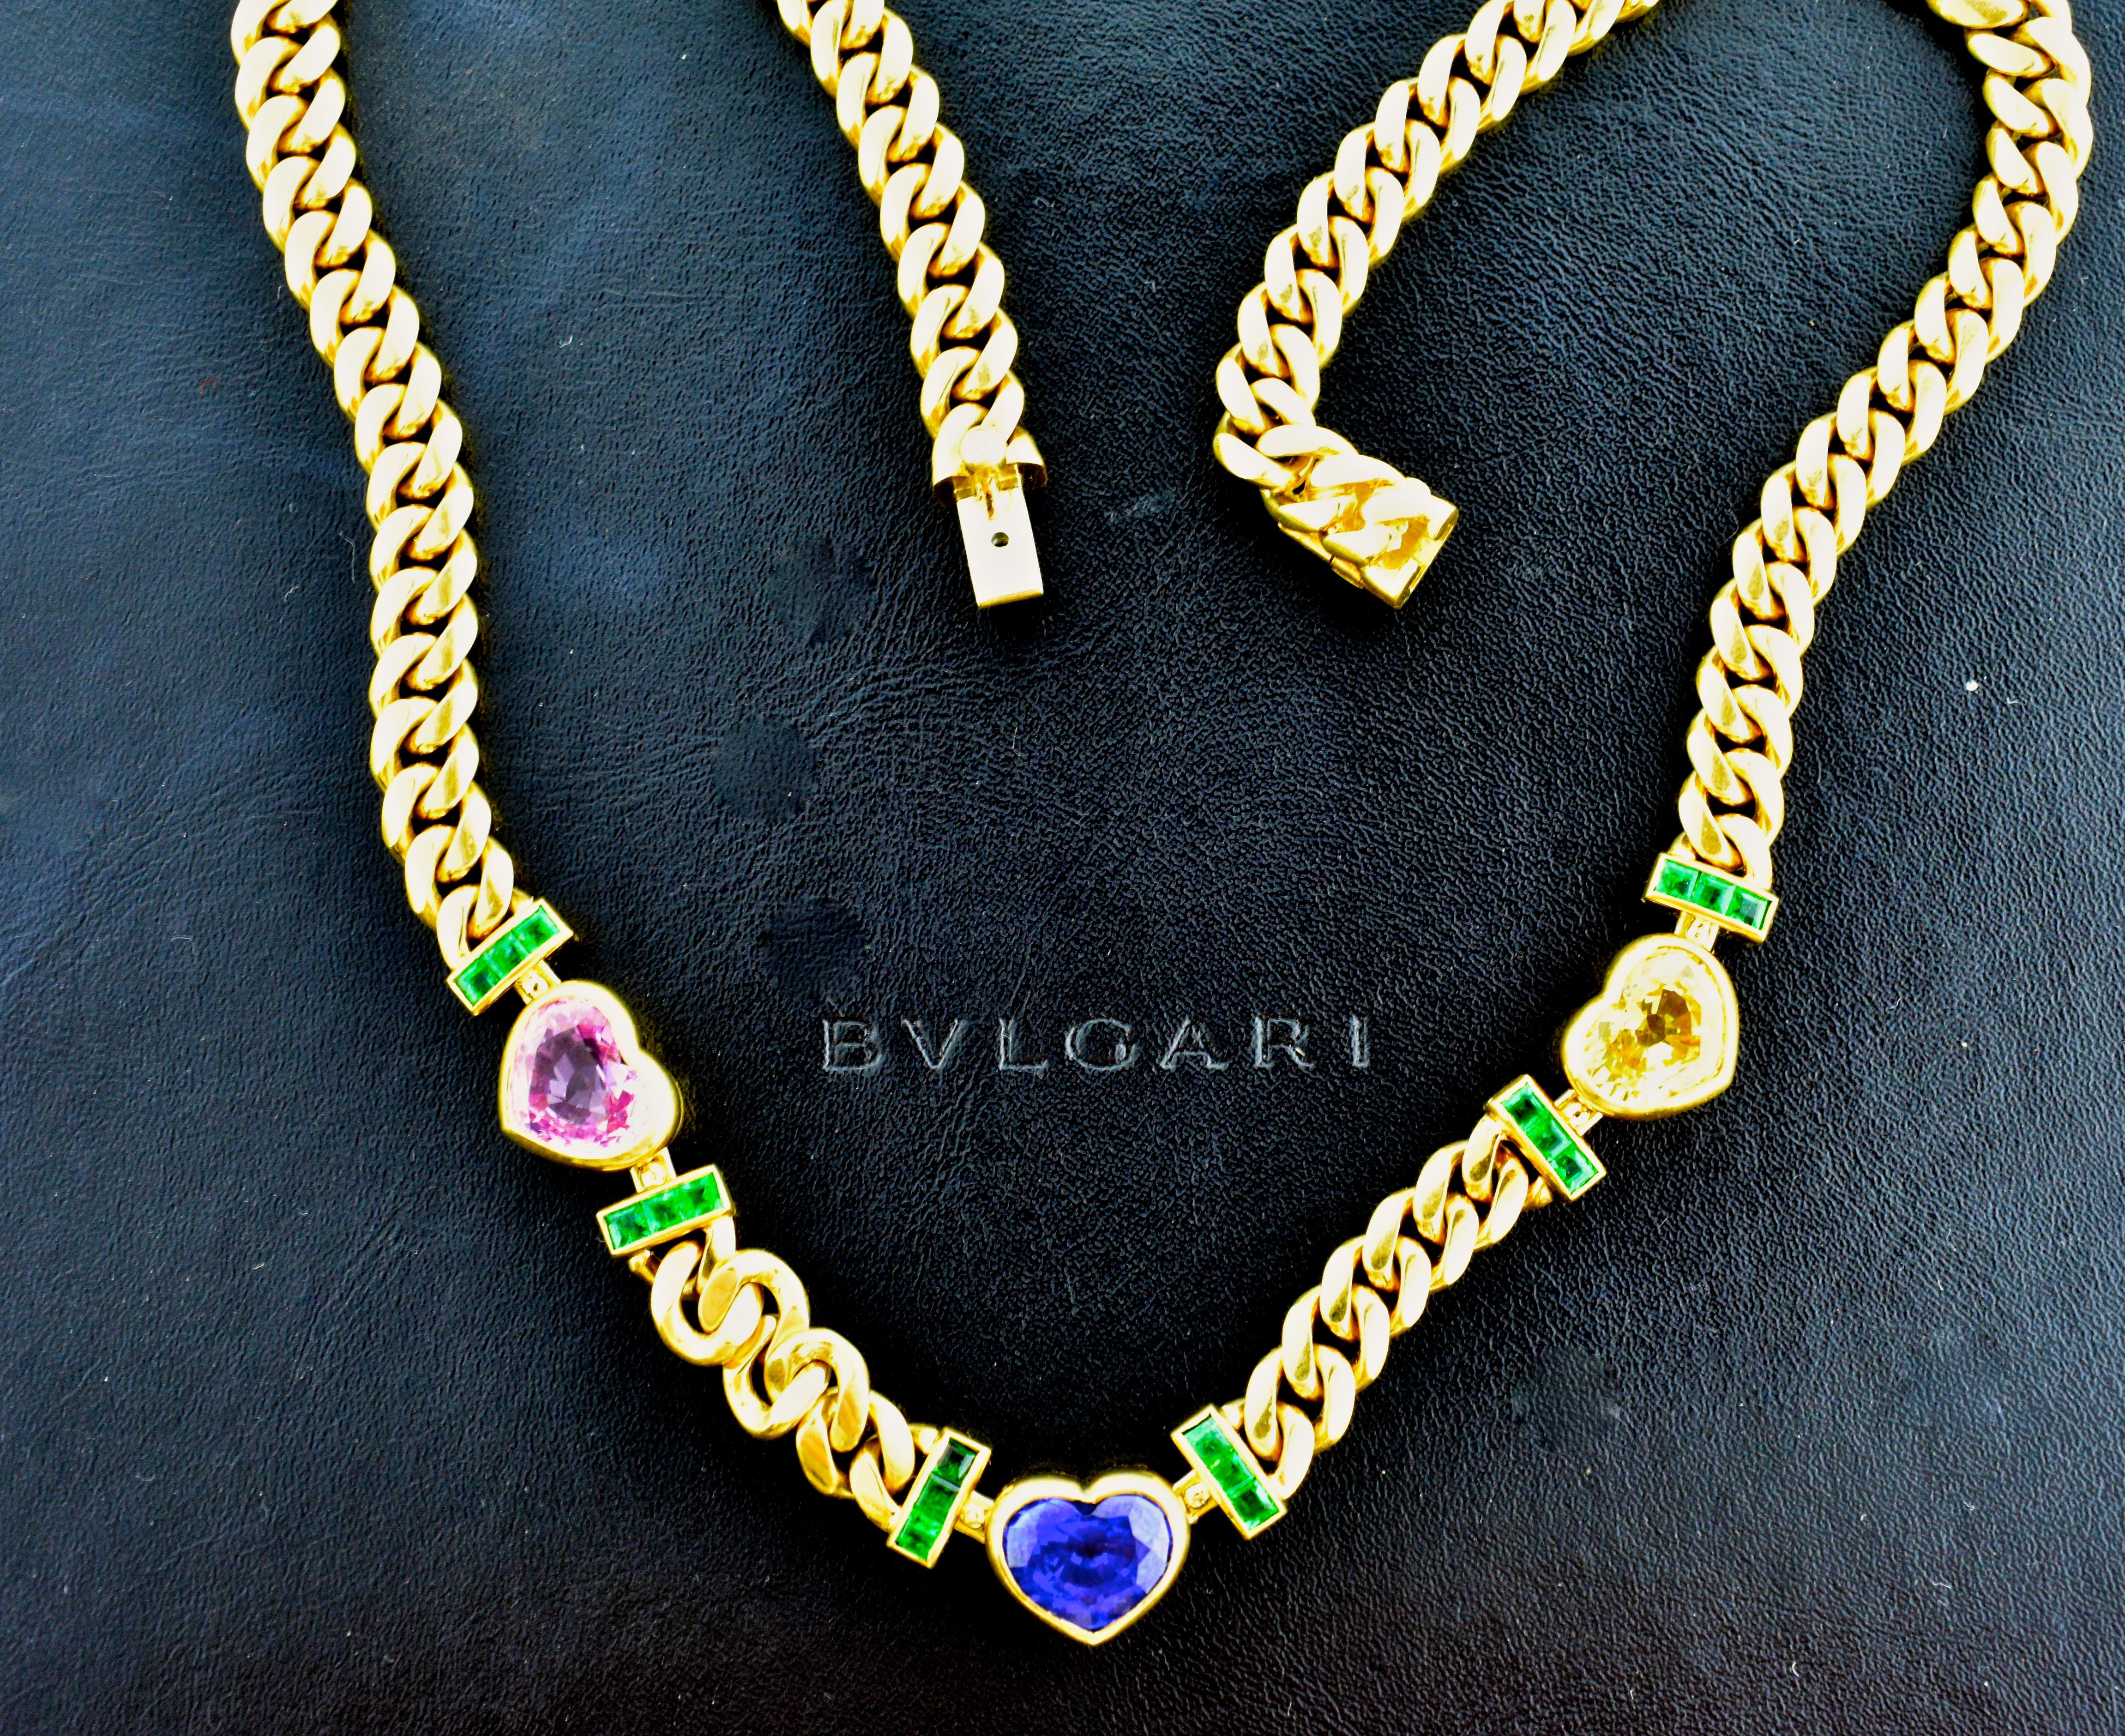 Bulgari necklace composed of 3 fine natural sapphires - pink, blue and yellow.  The center blue sapphire is accompanied by a certificate from G.I.A, stating that this stone weighs 3.5 cts., is unheated and from Burma.  The weight of each sapphire is